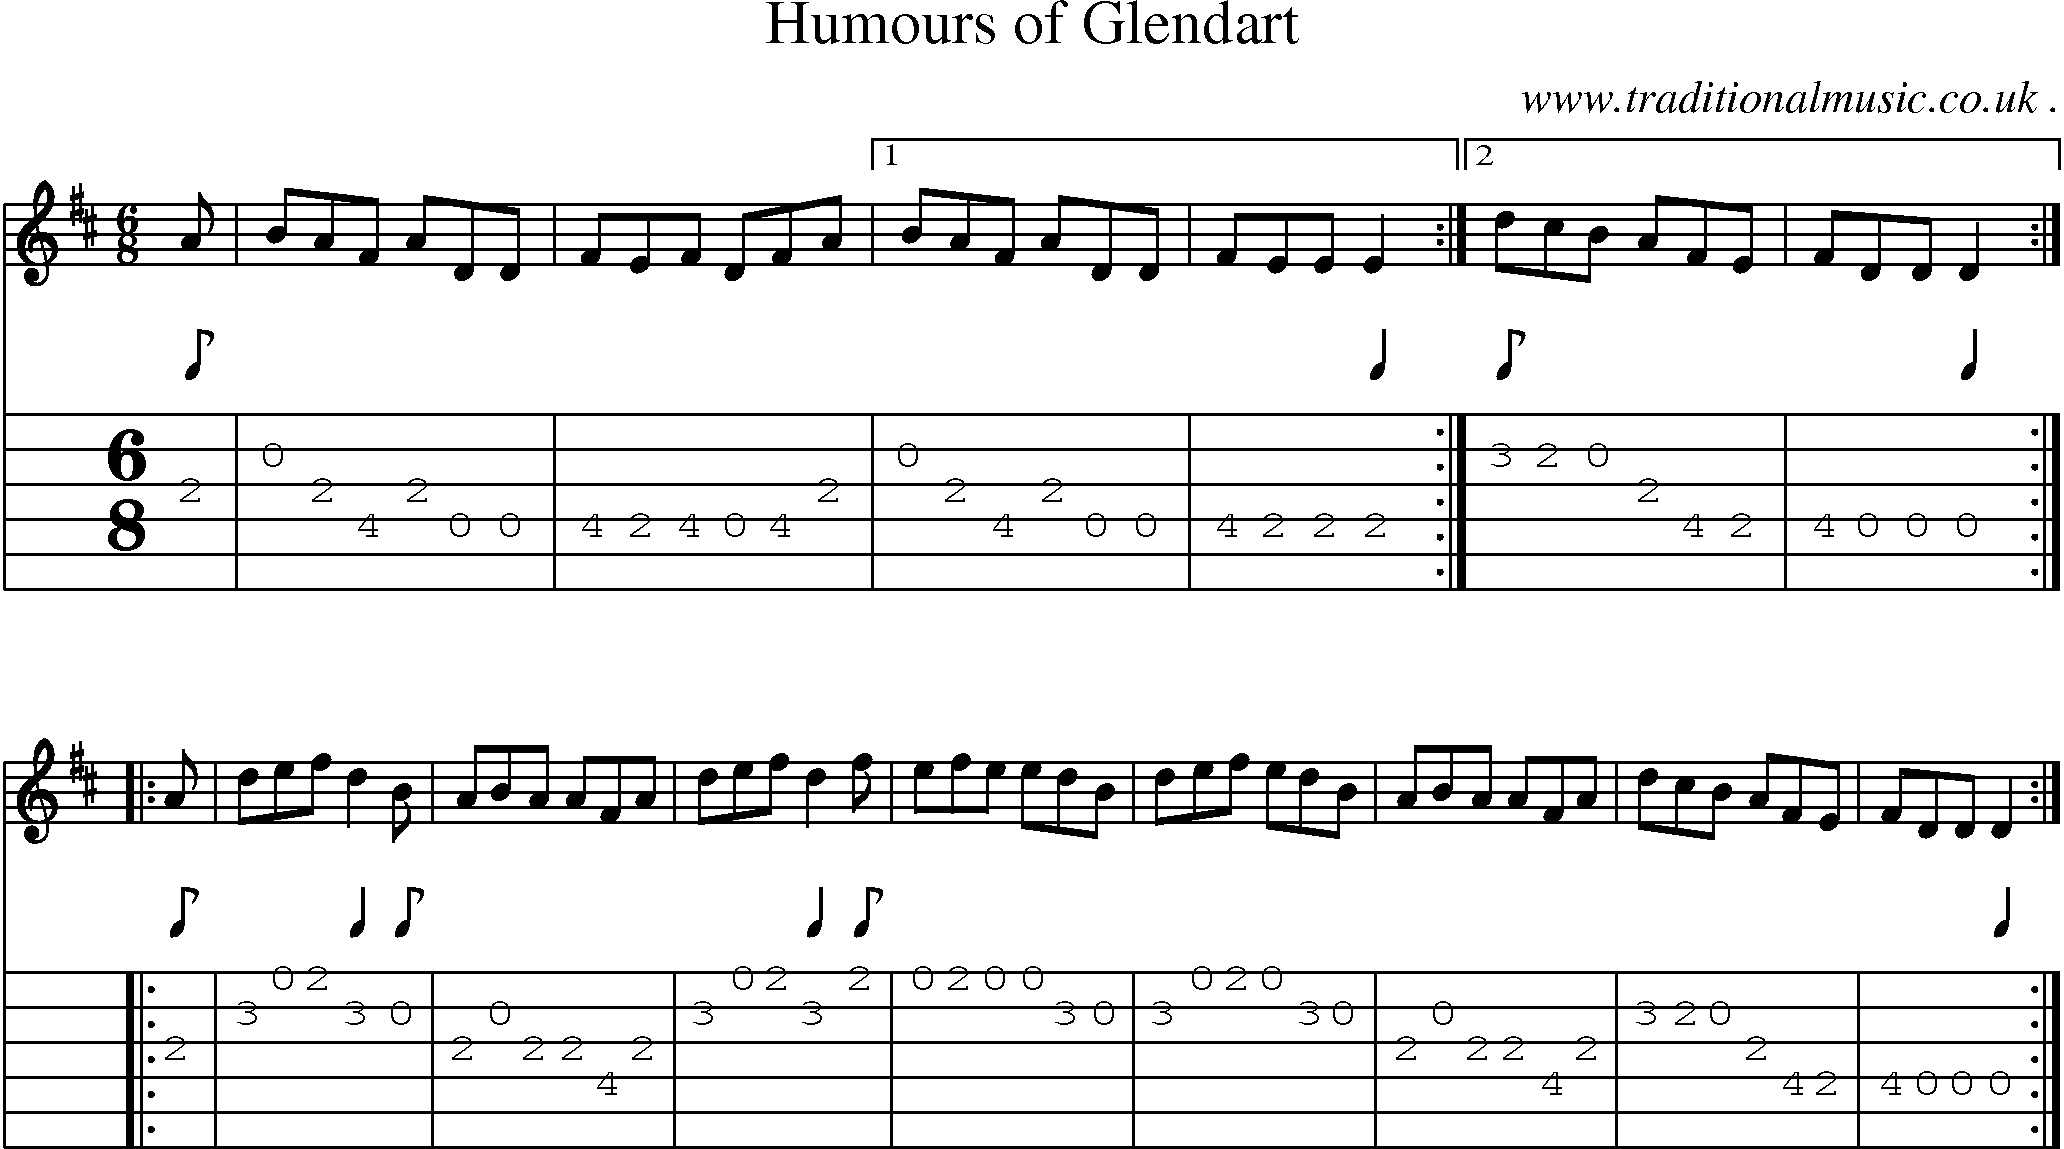 Sheet-music  score, Chords and Guitar Tabs for Humours Of Glendart